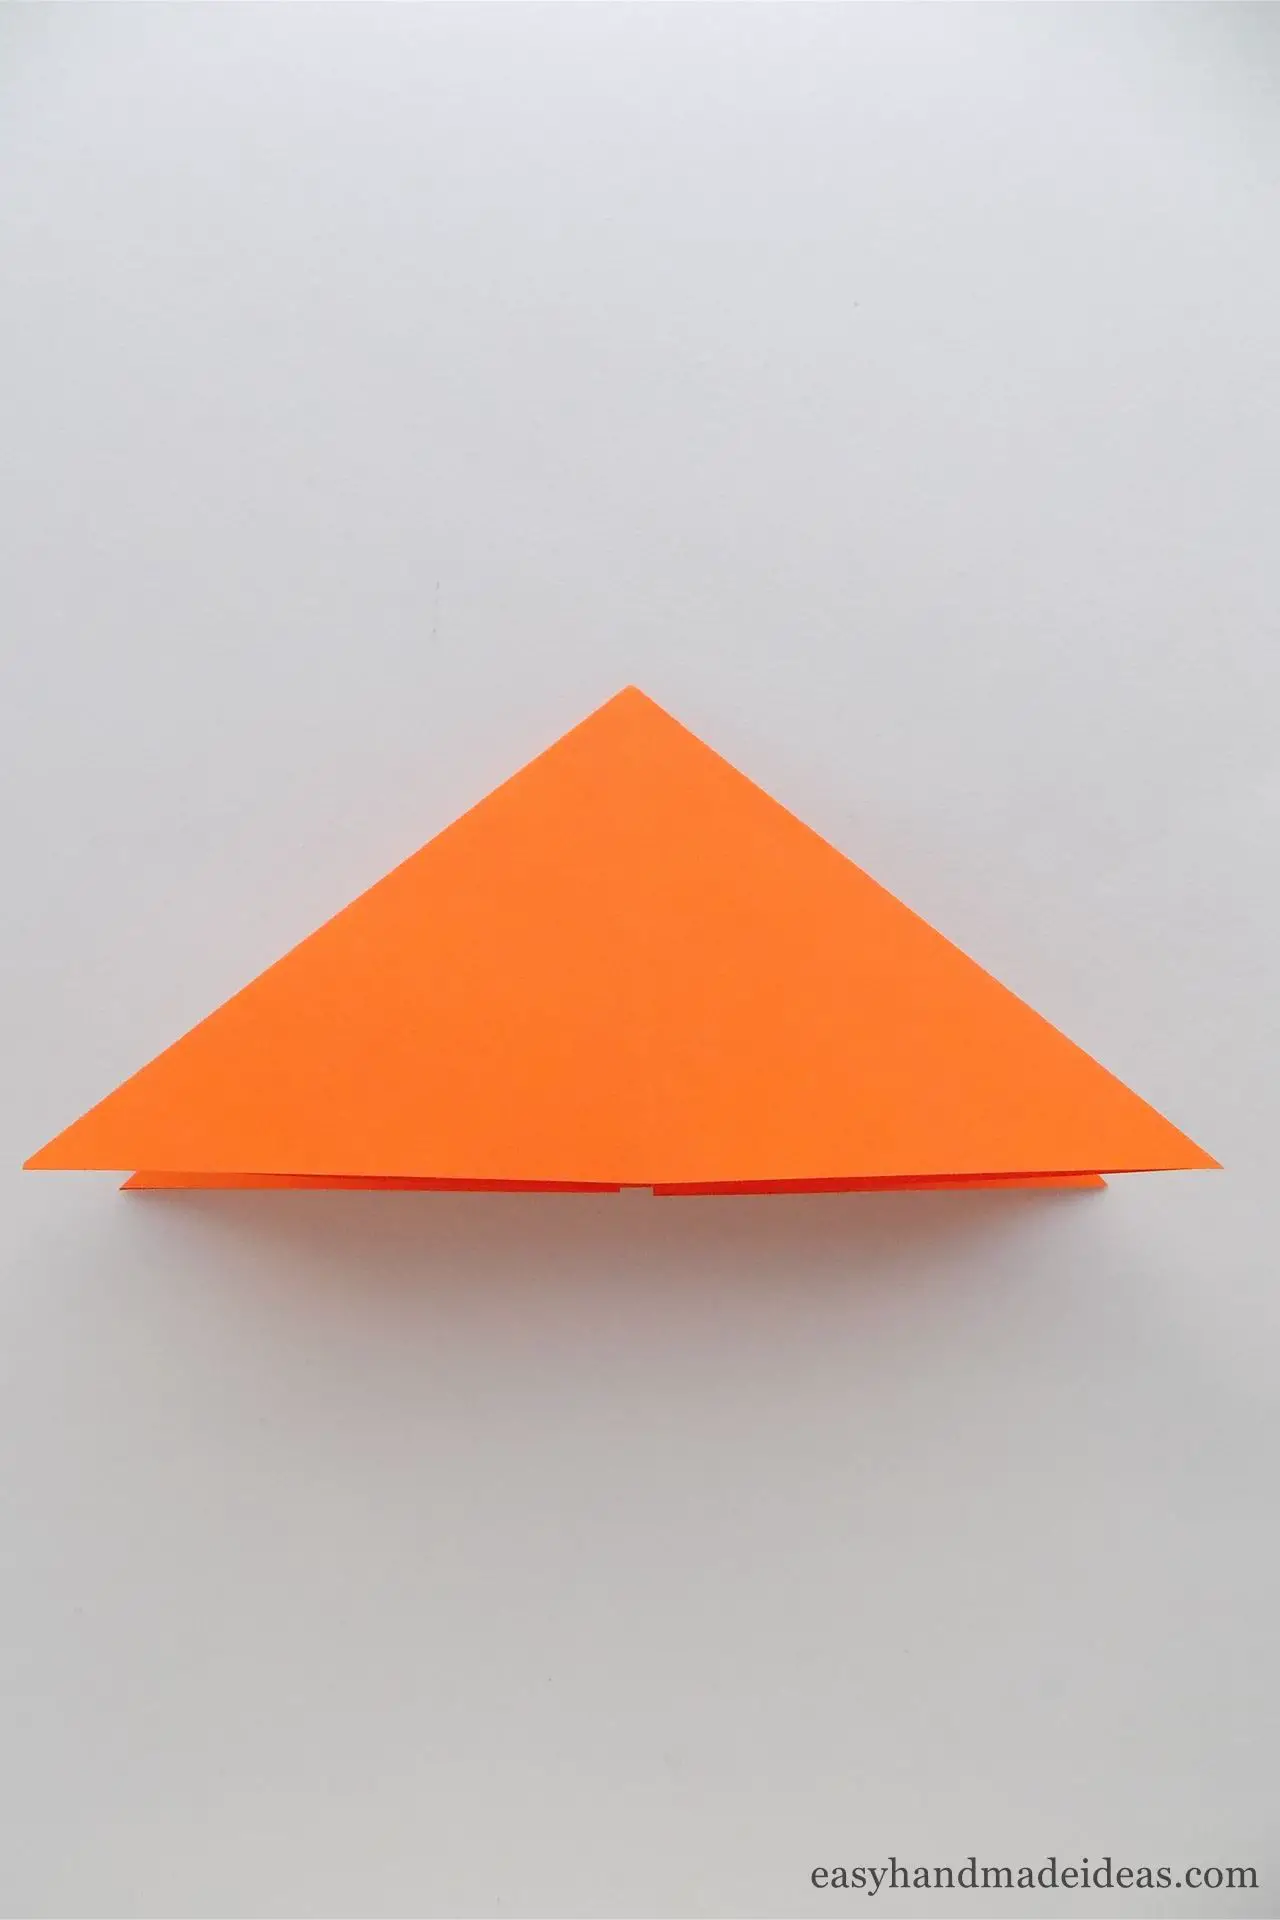 Fold both sides of the square inward to make a triangle